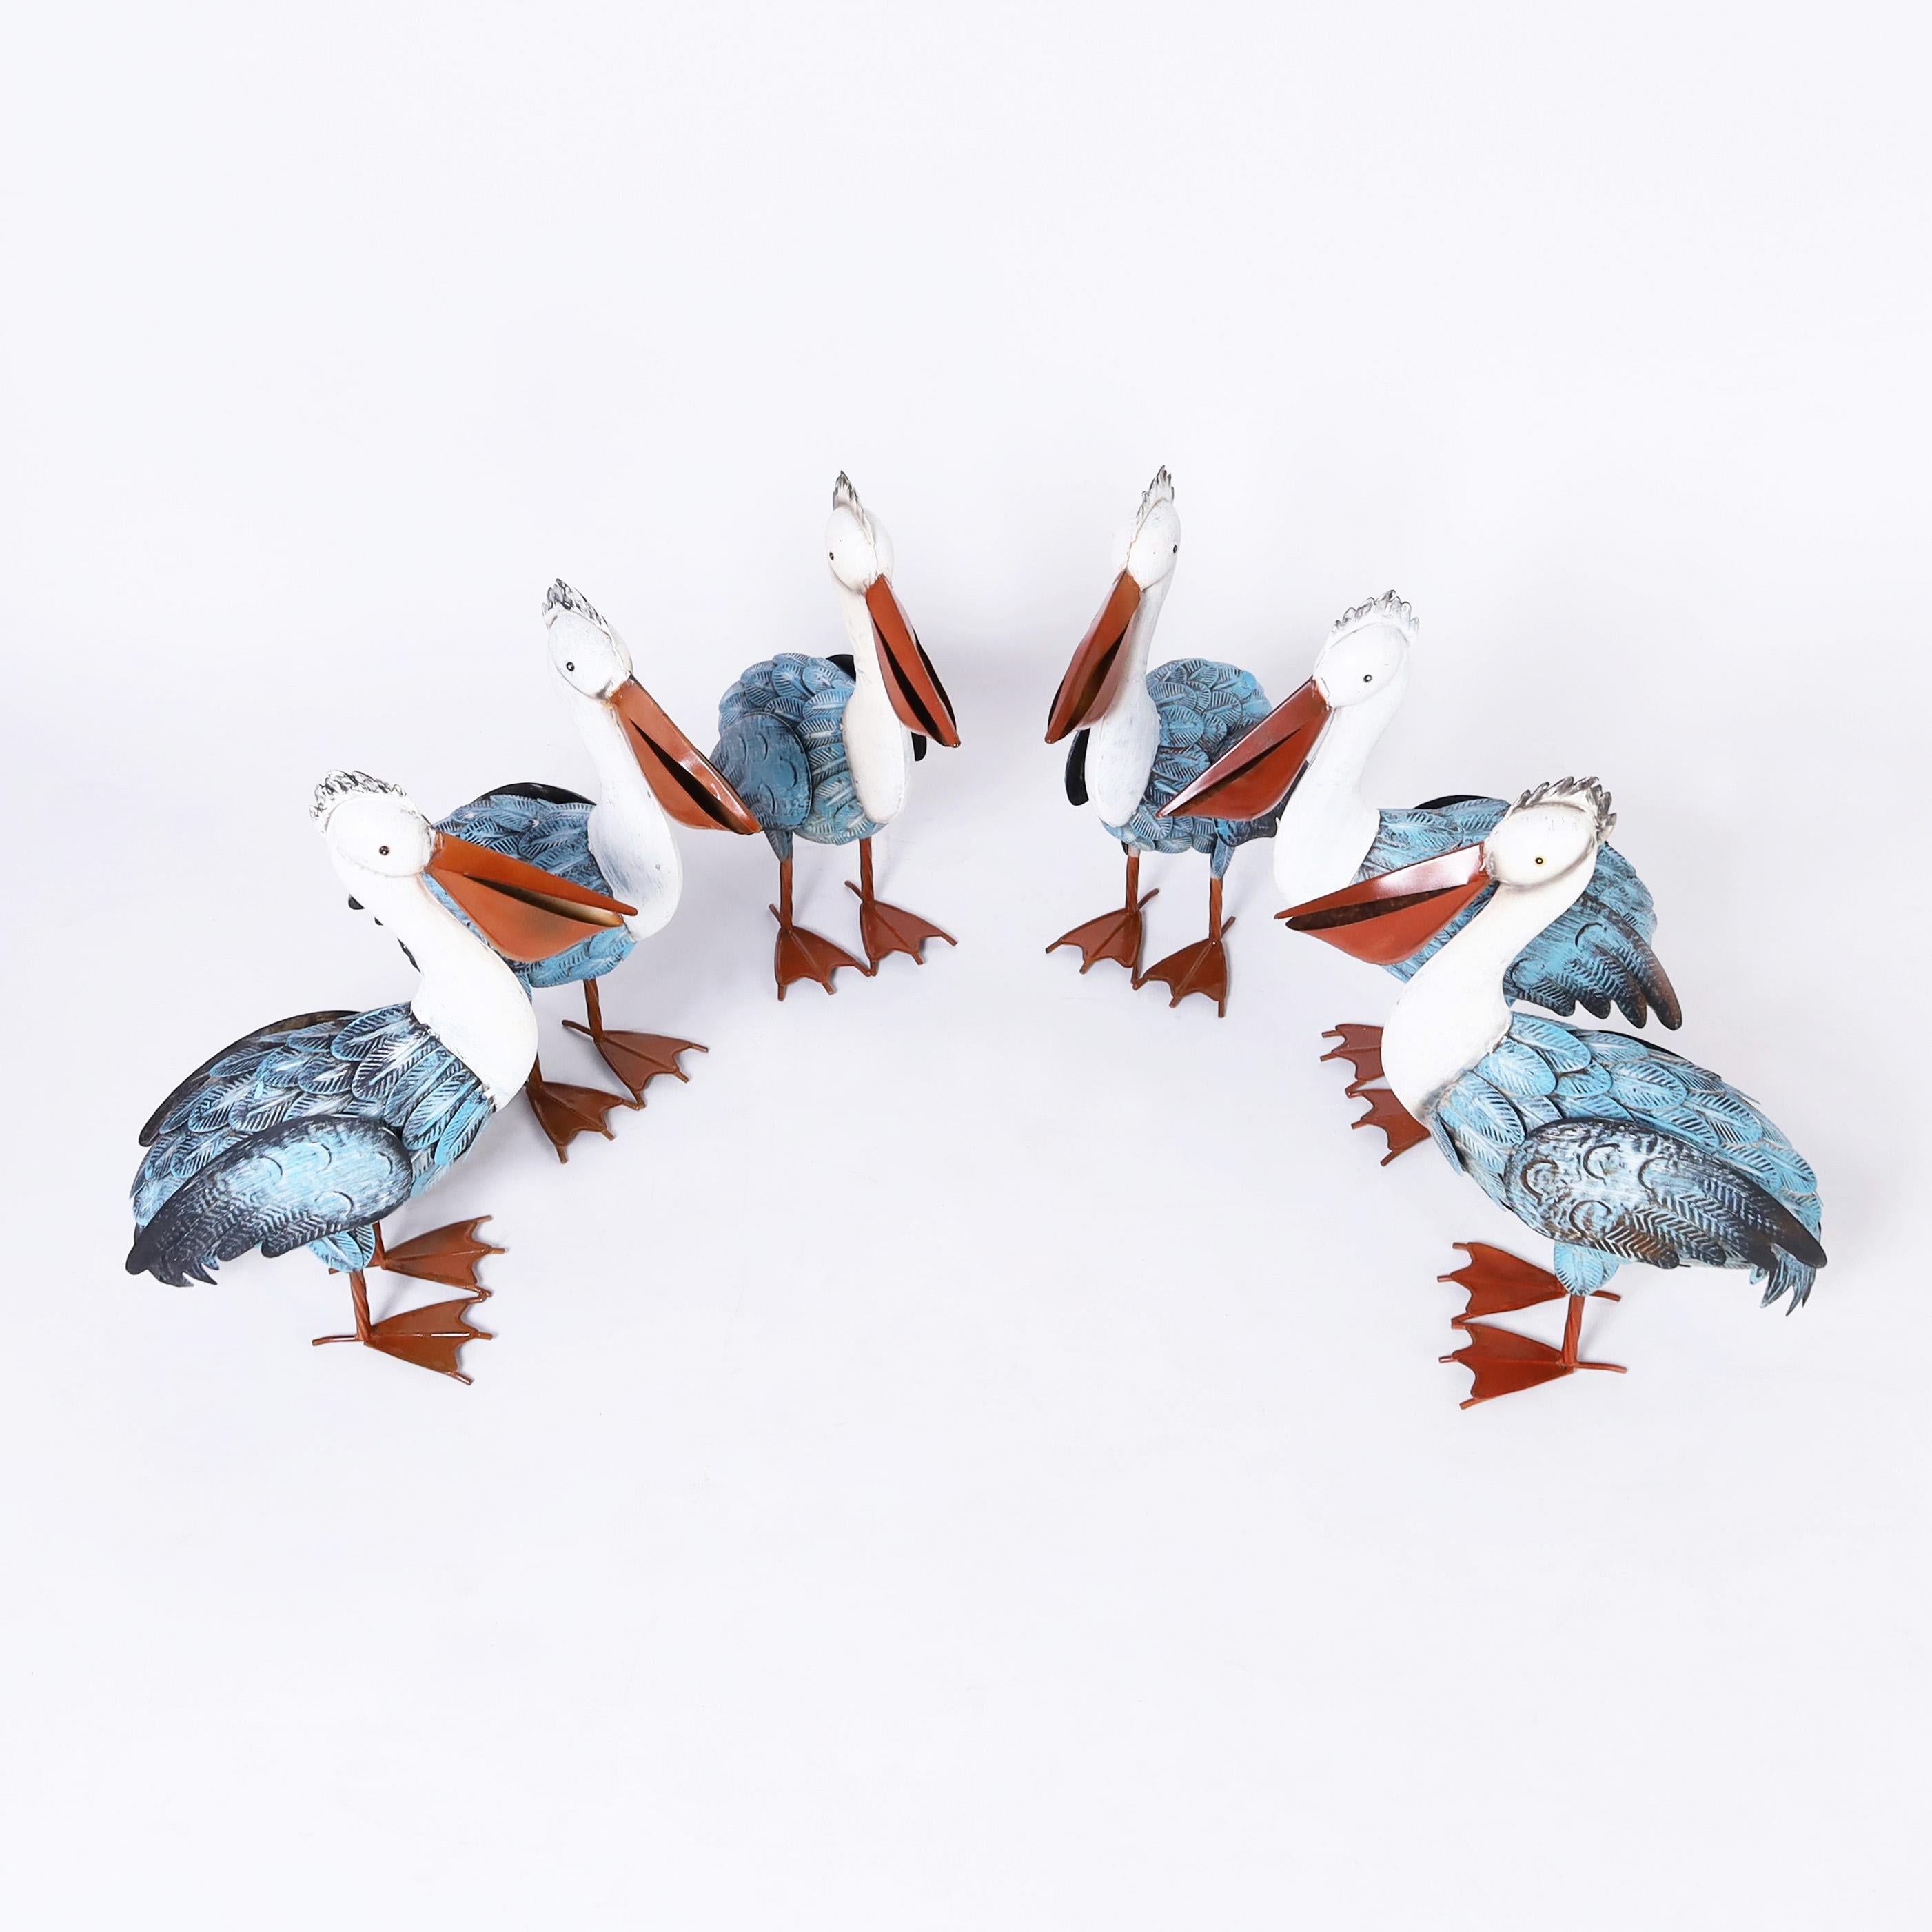 Flock of pelicans hand crafted in metal in a charming stylized form, painted and ready for a new environment. Priced per pair.